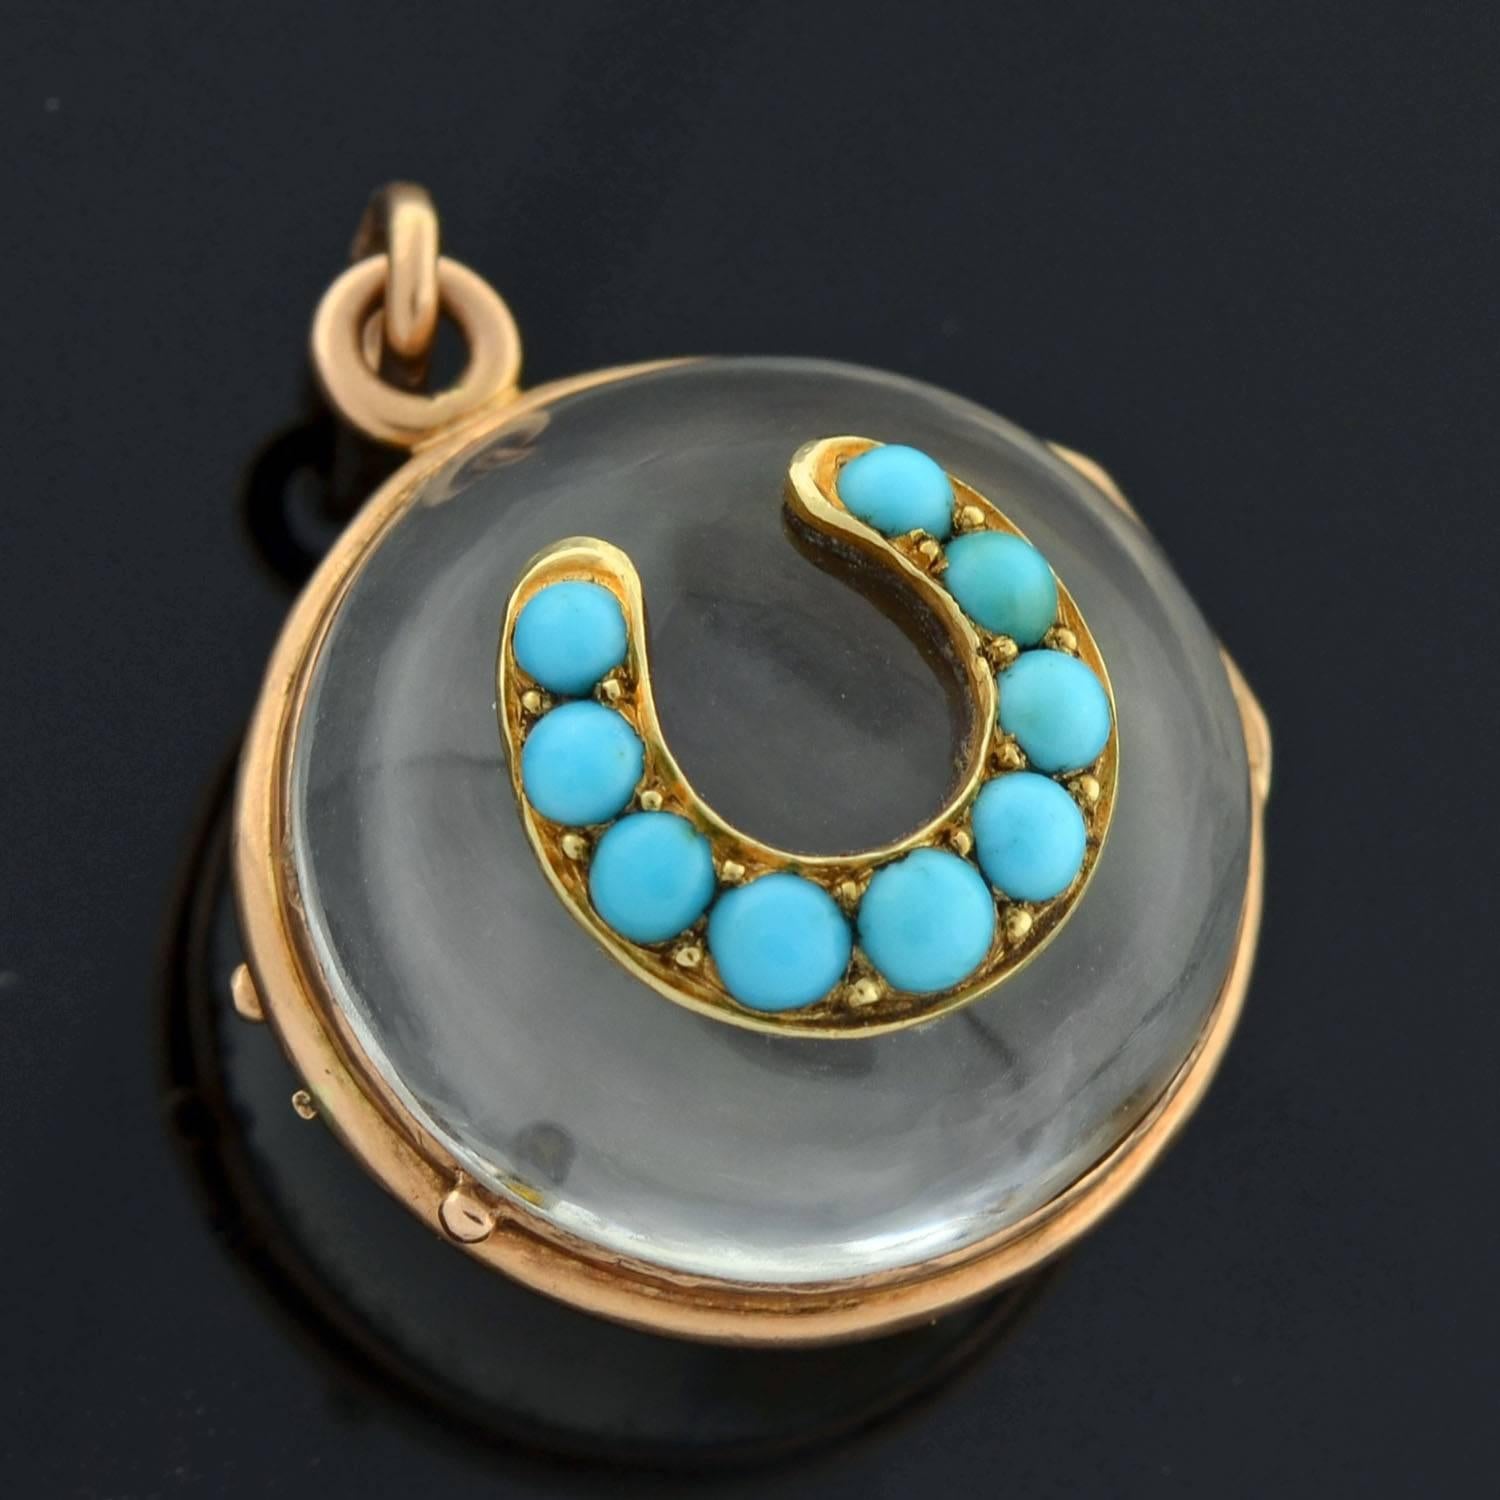 A beautiful and unusual horseshoe locket from the Victorian (ca1880) era! This spherical locket is carved from rock quartz crystal and is set in 14kt yellow gold. At the center is a lovely turquoise horseshoe motif! The smooth, clear rock quartz